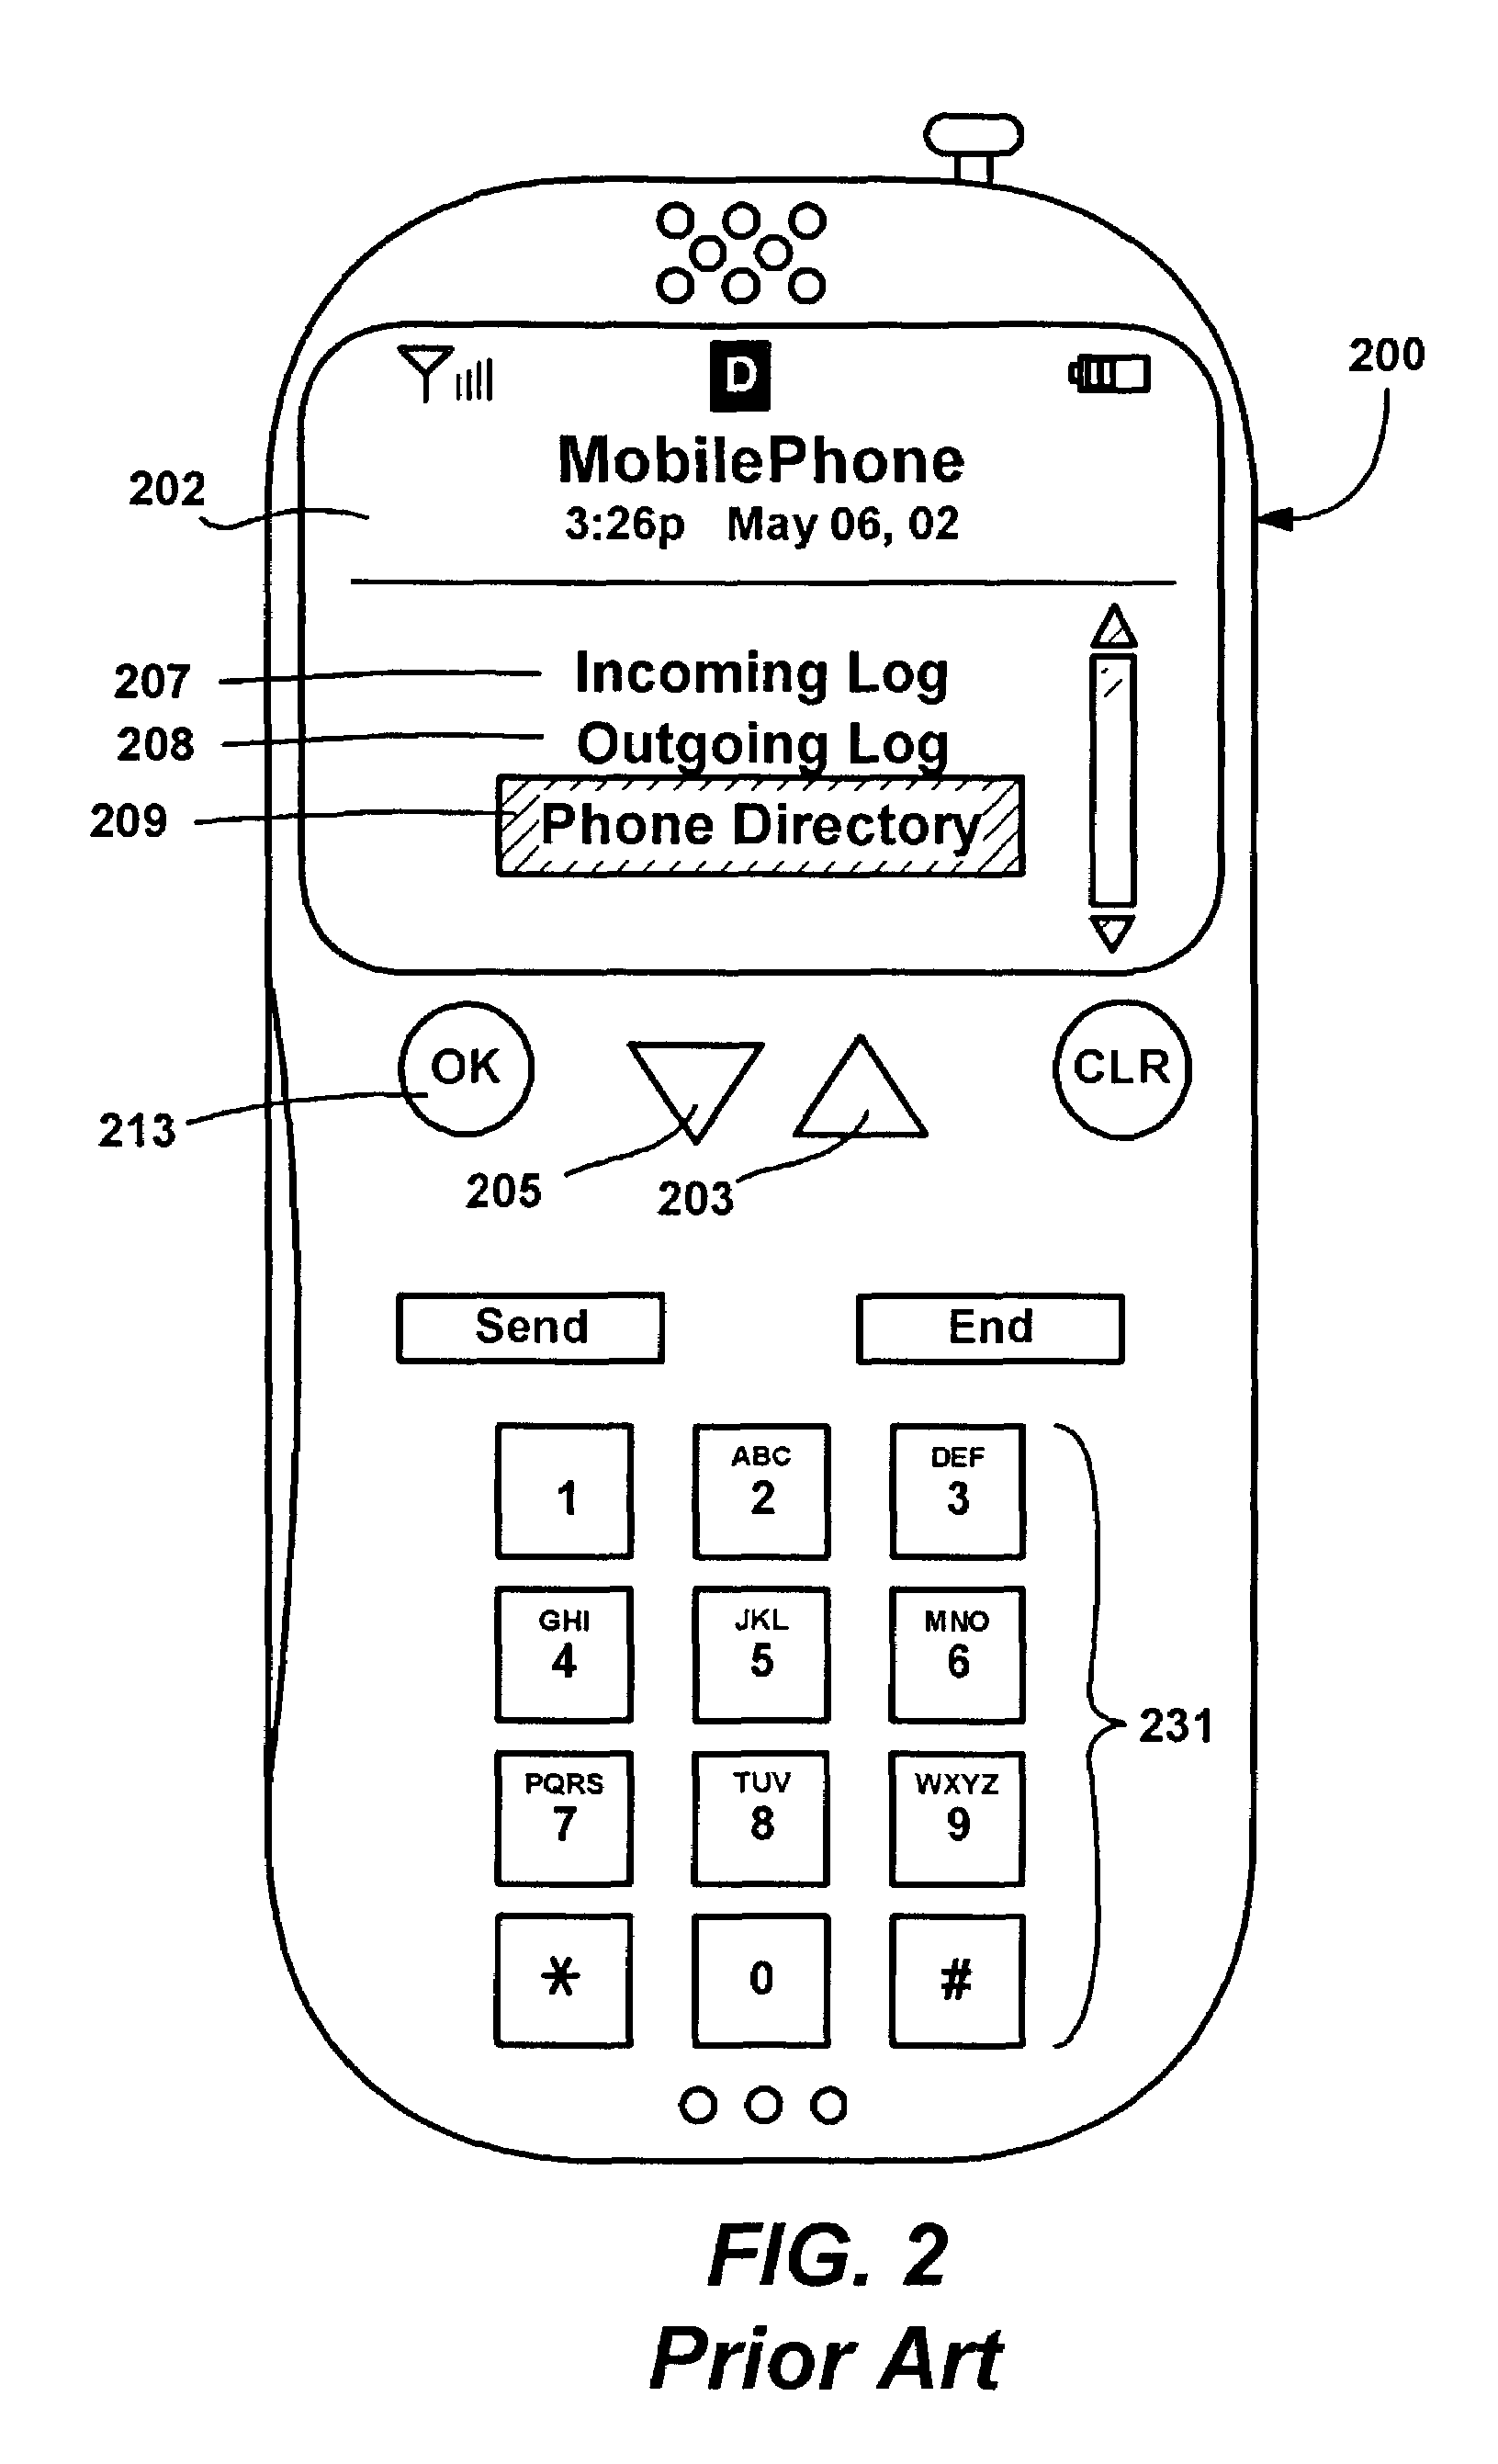 Method and system for presenting menu commands for selection